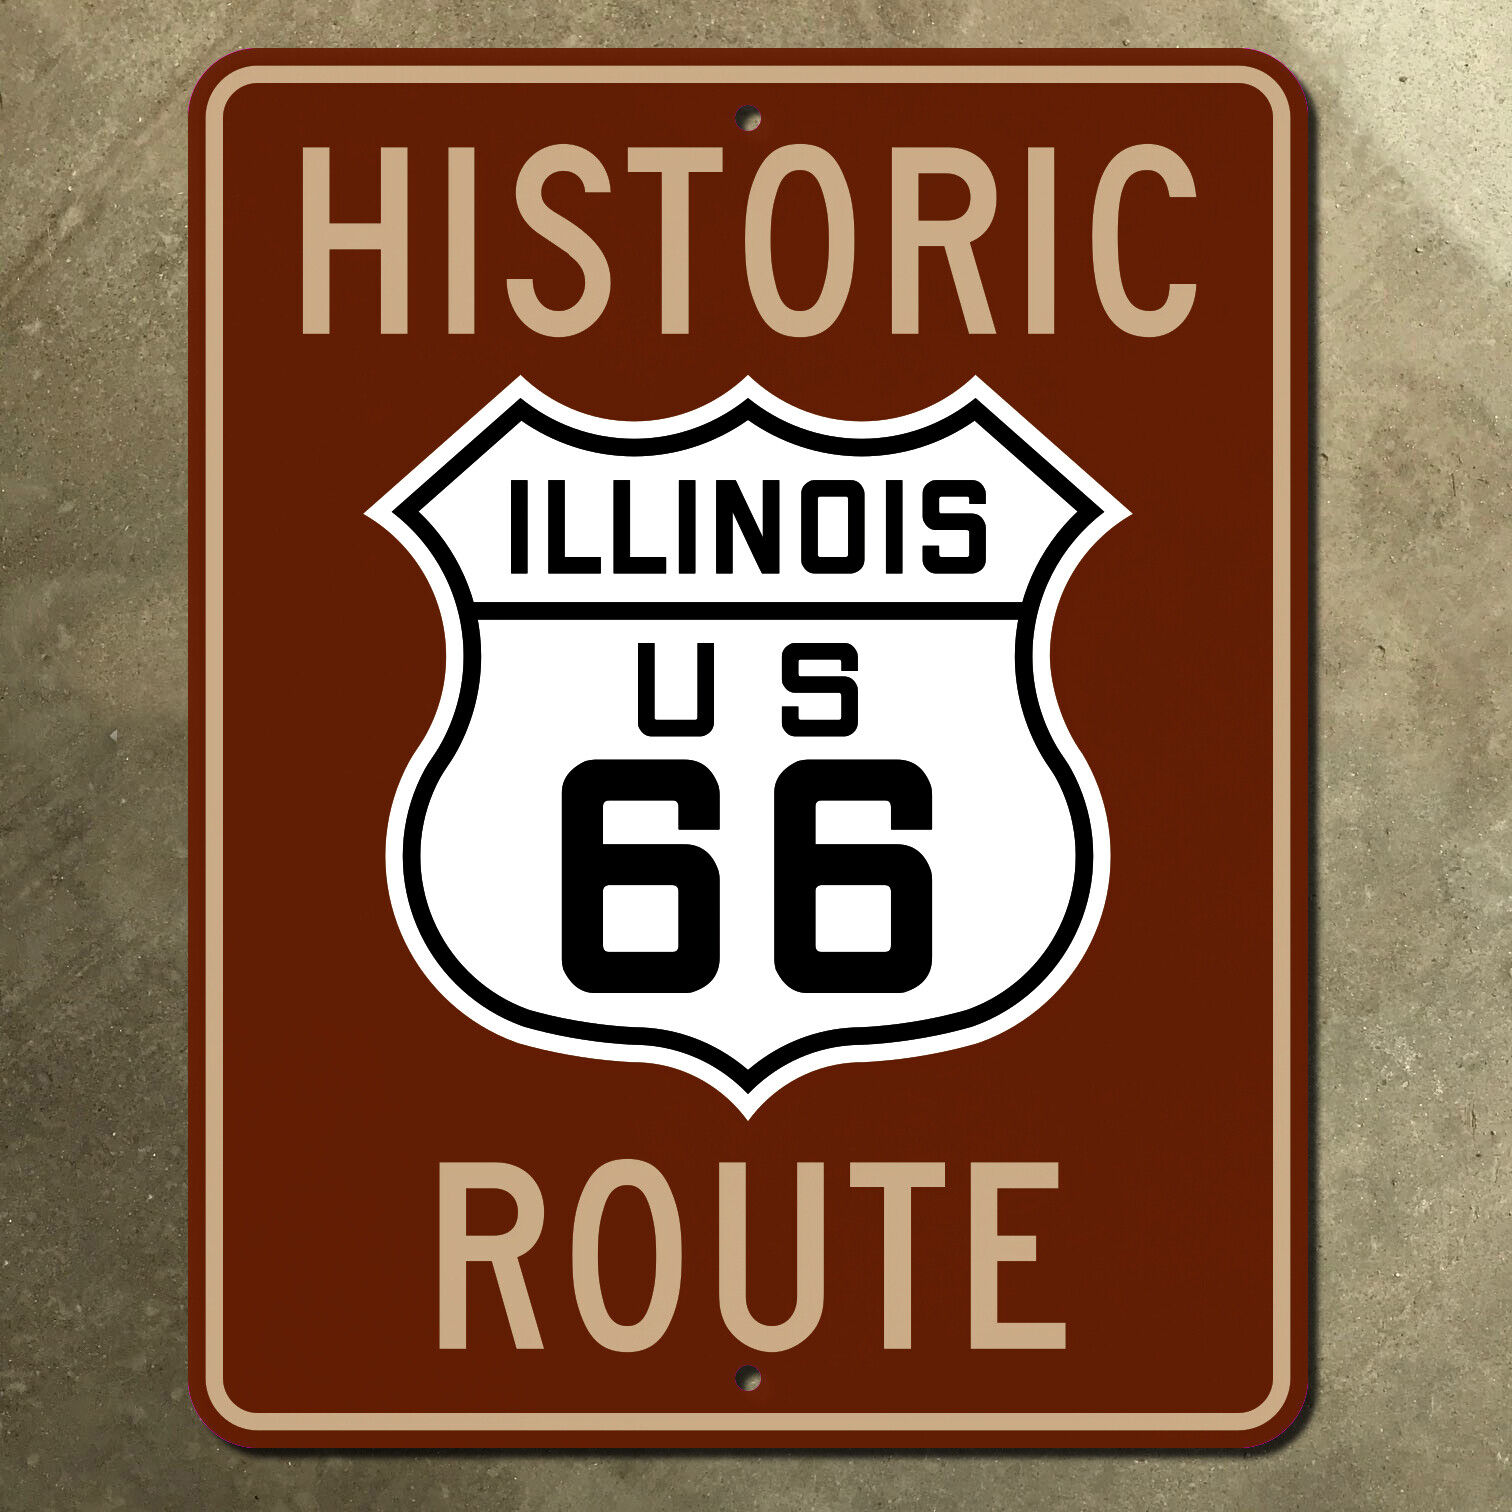 Illinois historic route US 66 Chicago highway road sign mother road 16x20